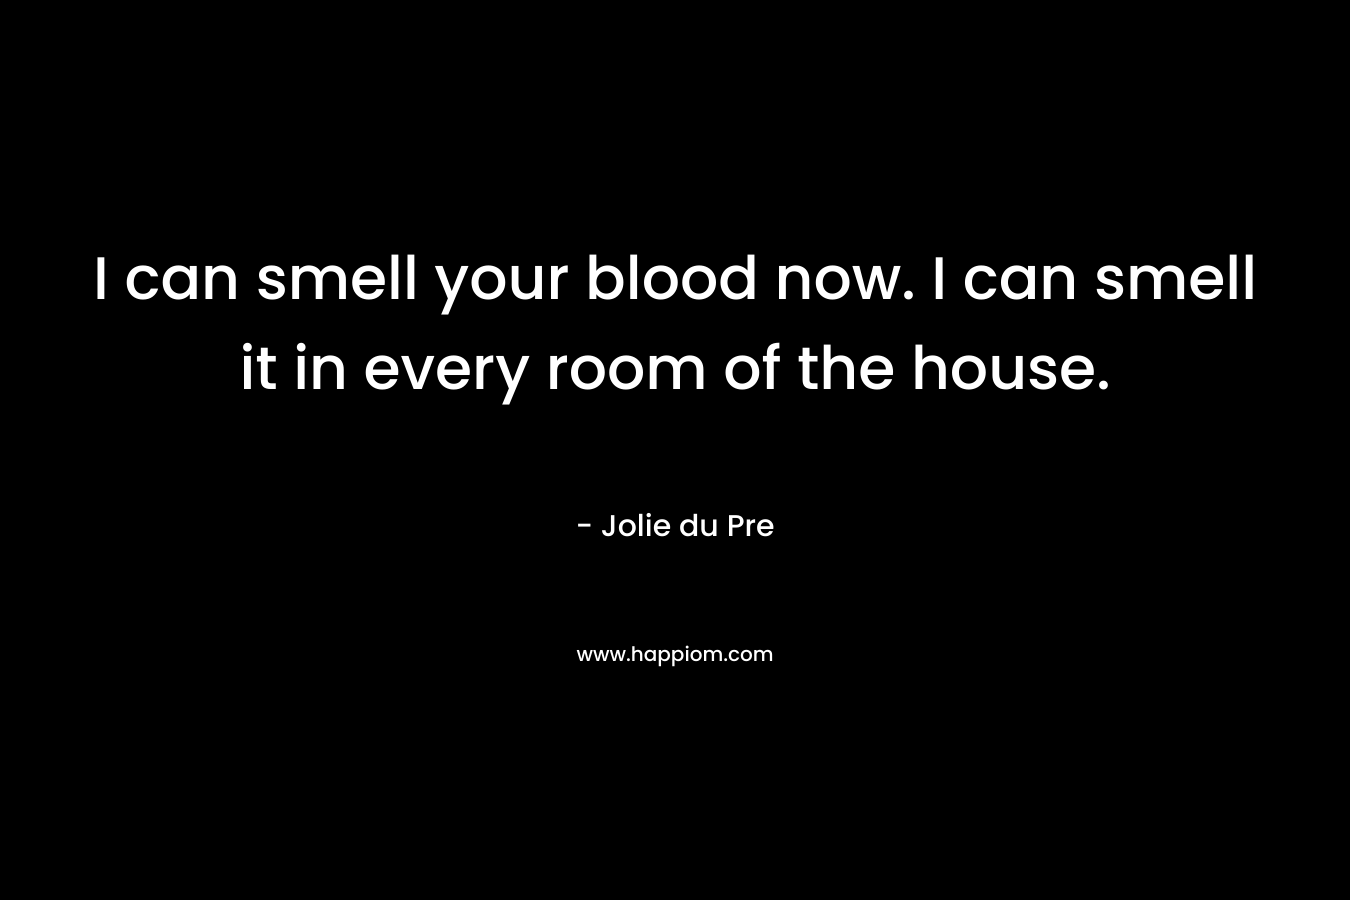 I can smell your blood now. I can smell it in every room of the house.